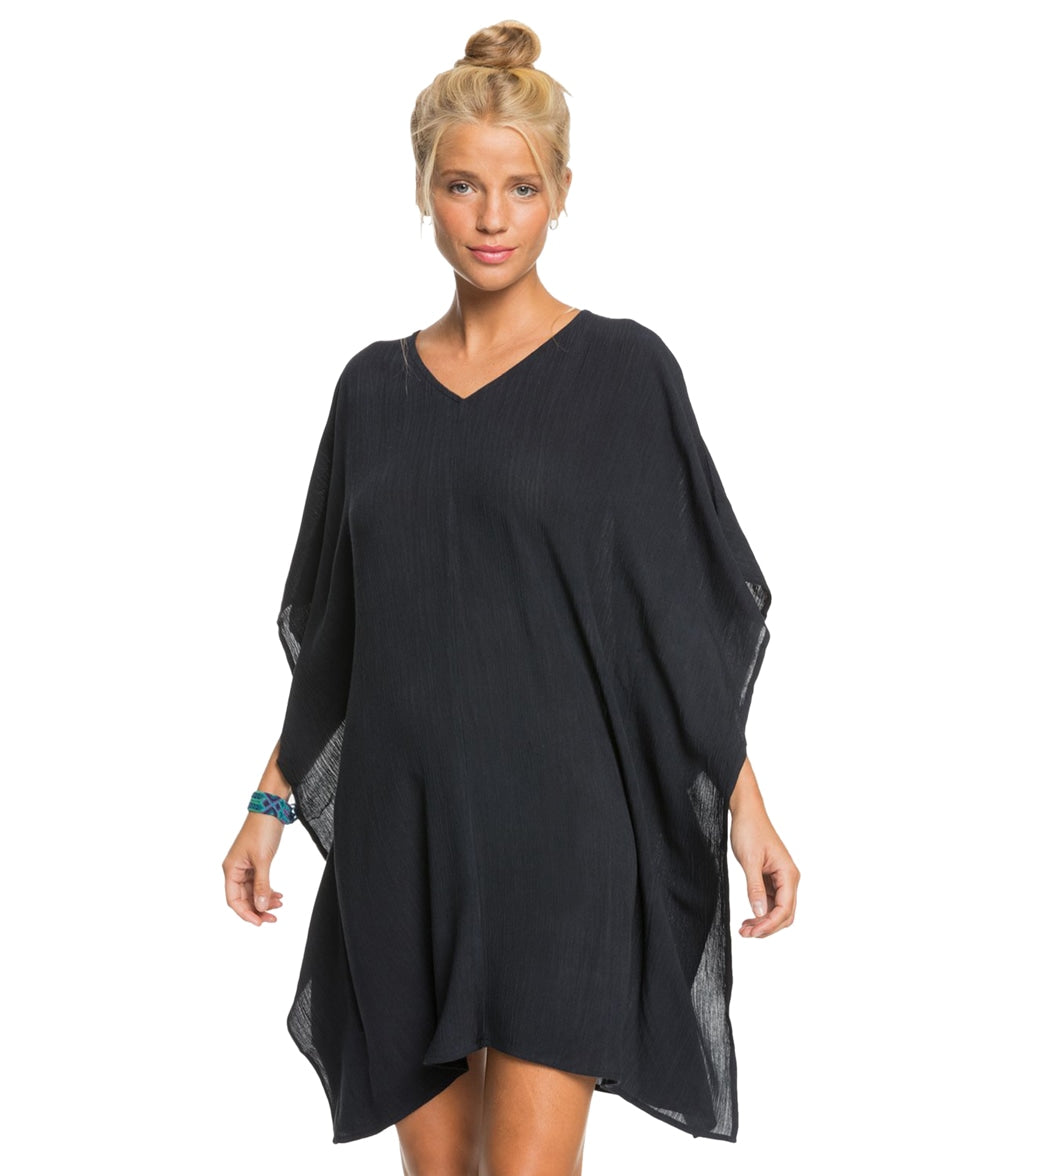 Roxy Women's Moon Blessing Poncho - Anthracite X-Small/Small - Swimoutlet.com